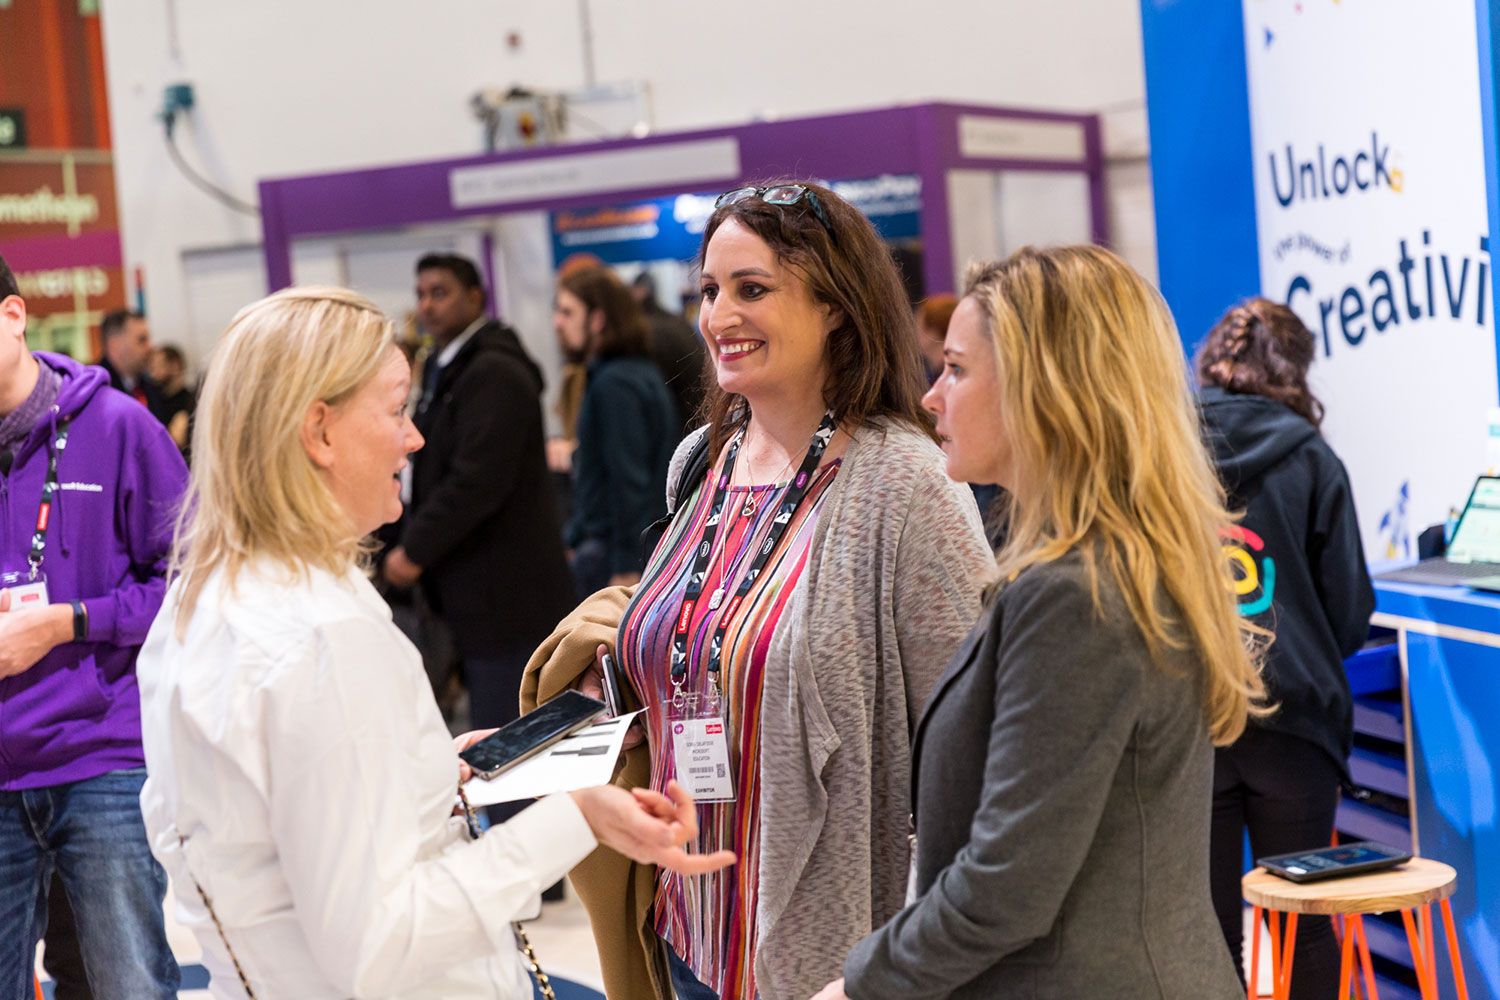 Bett UK 2022 is postponed to 23-25 March and will continue to take place at the ExCeL London